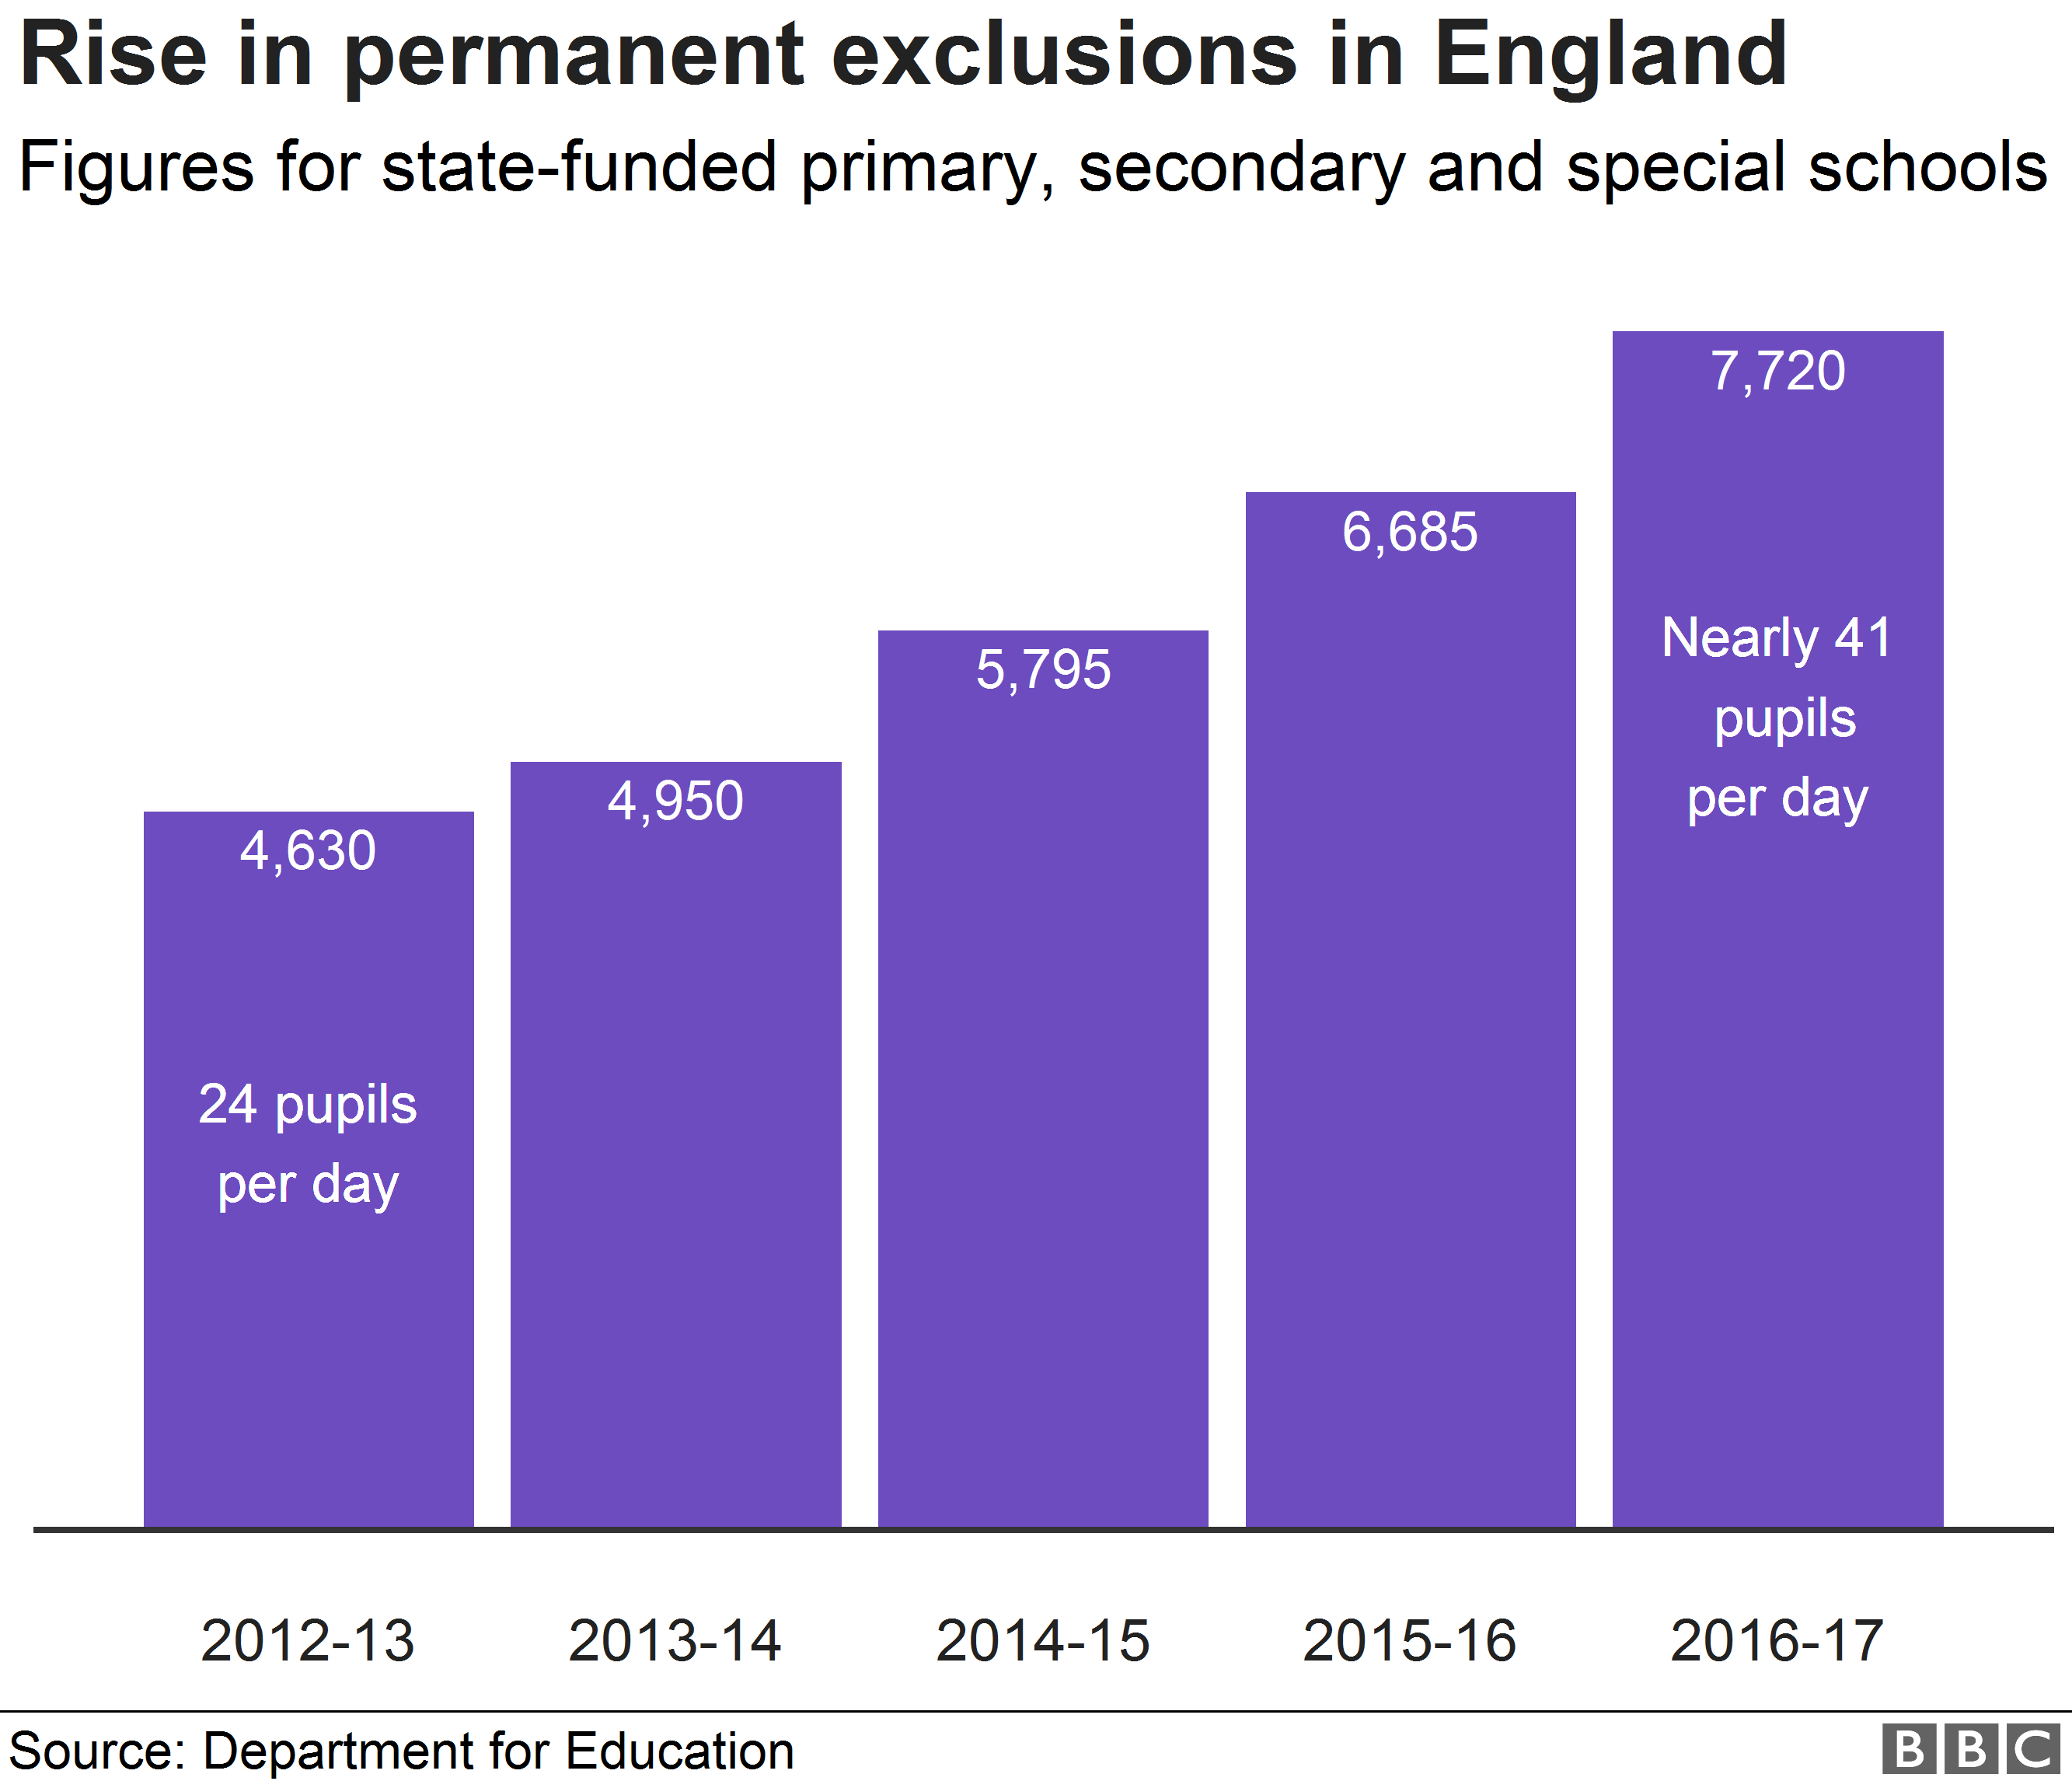 Chart showing the rise in permanent exclusions in England